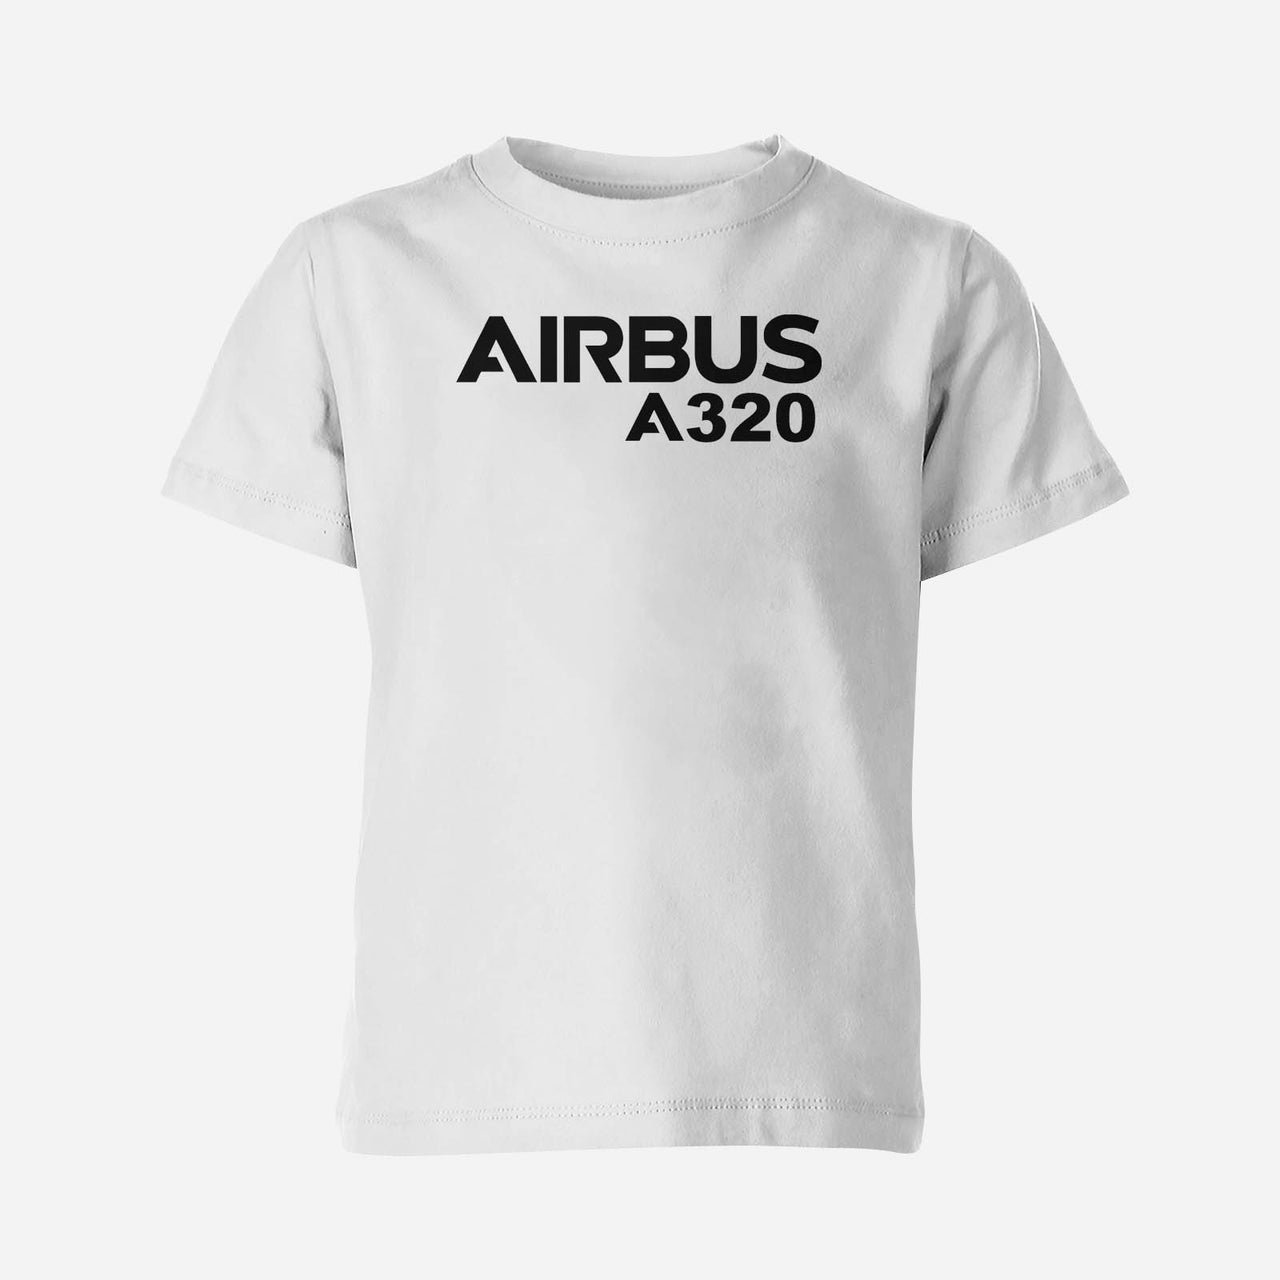 Airbus A320 & Text Designed Children T-Shirts